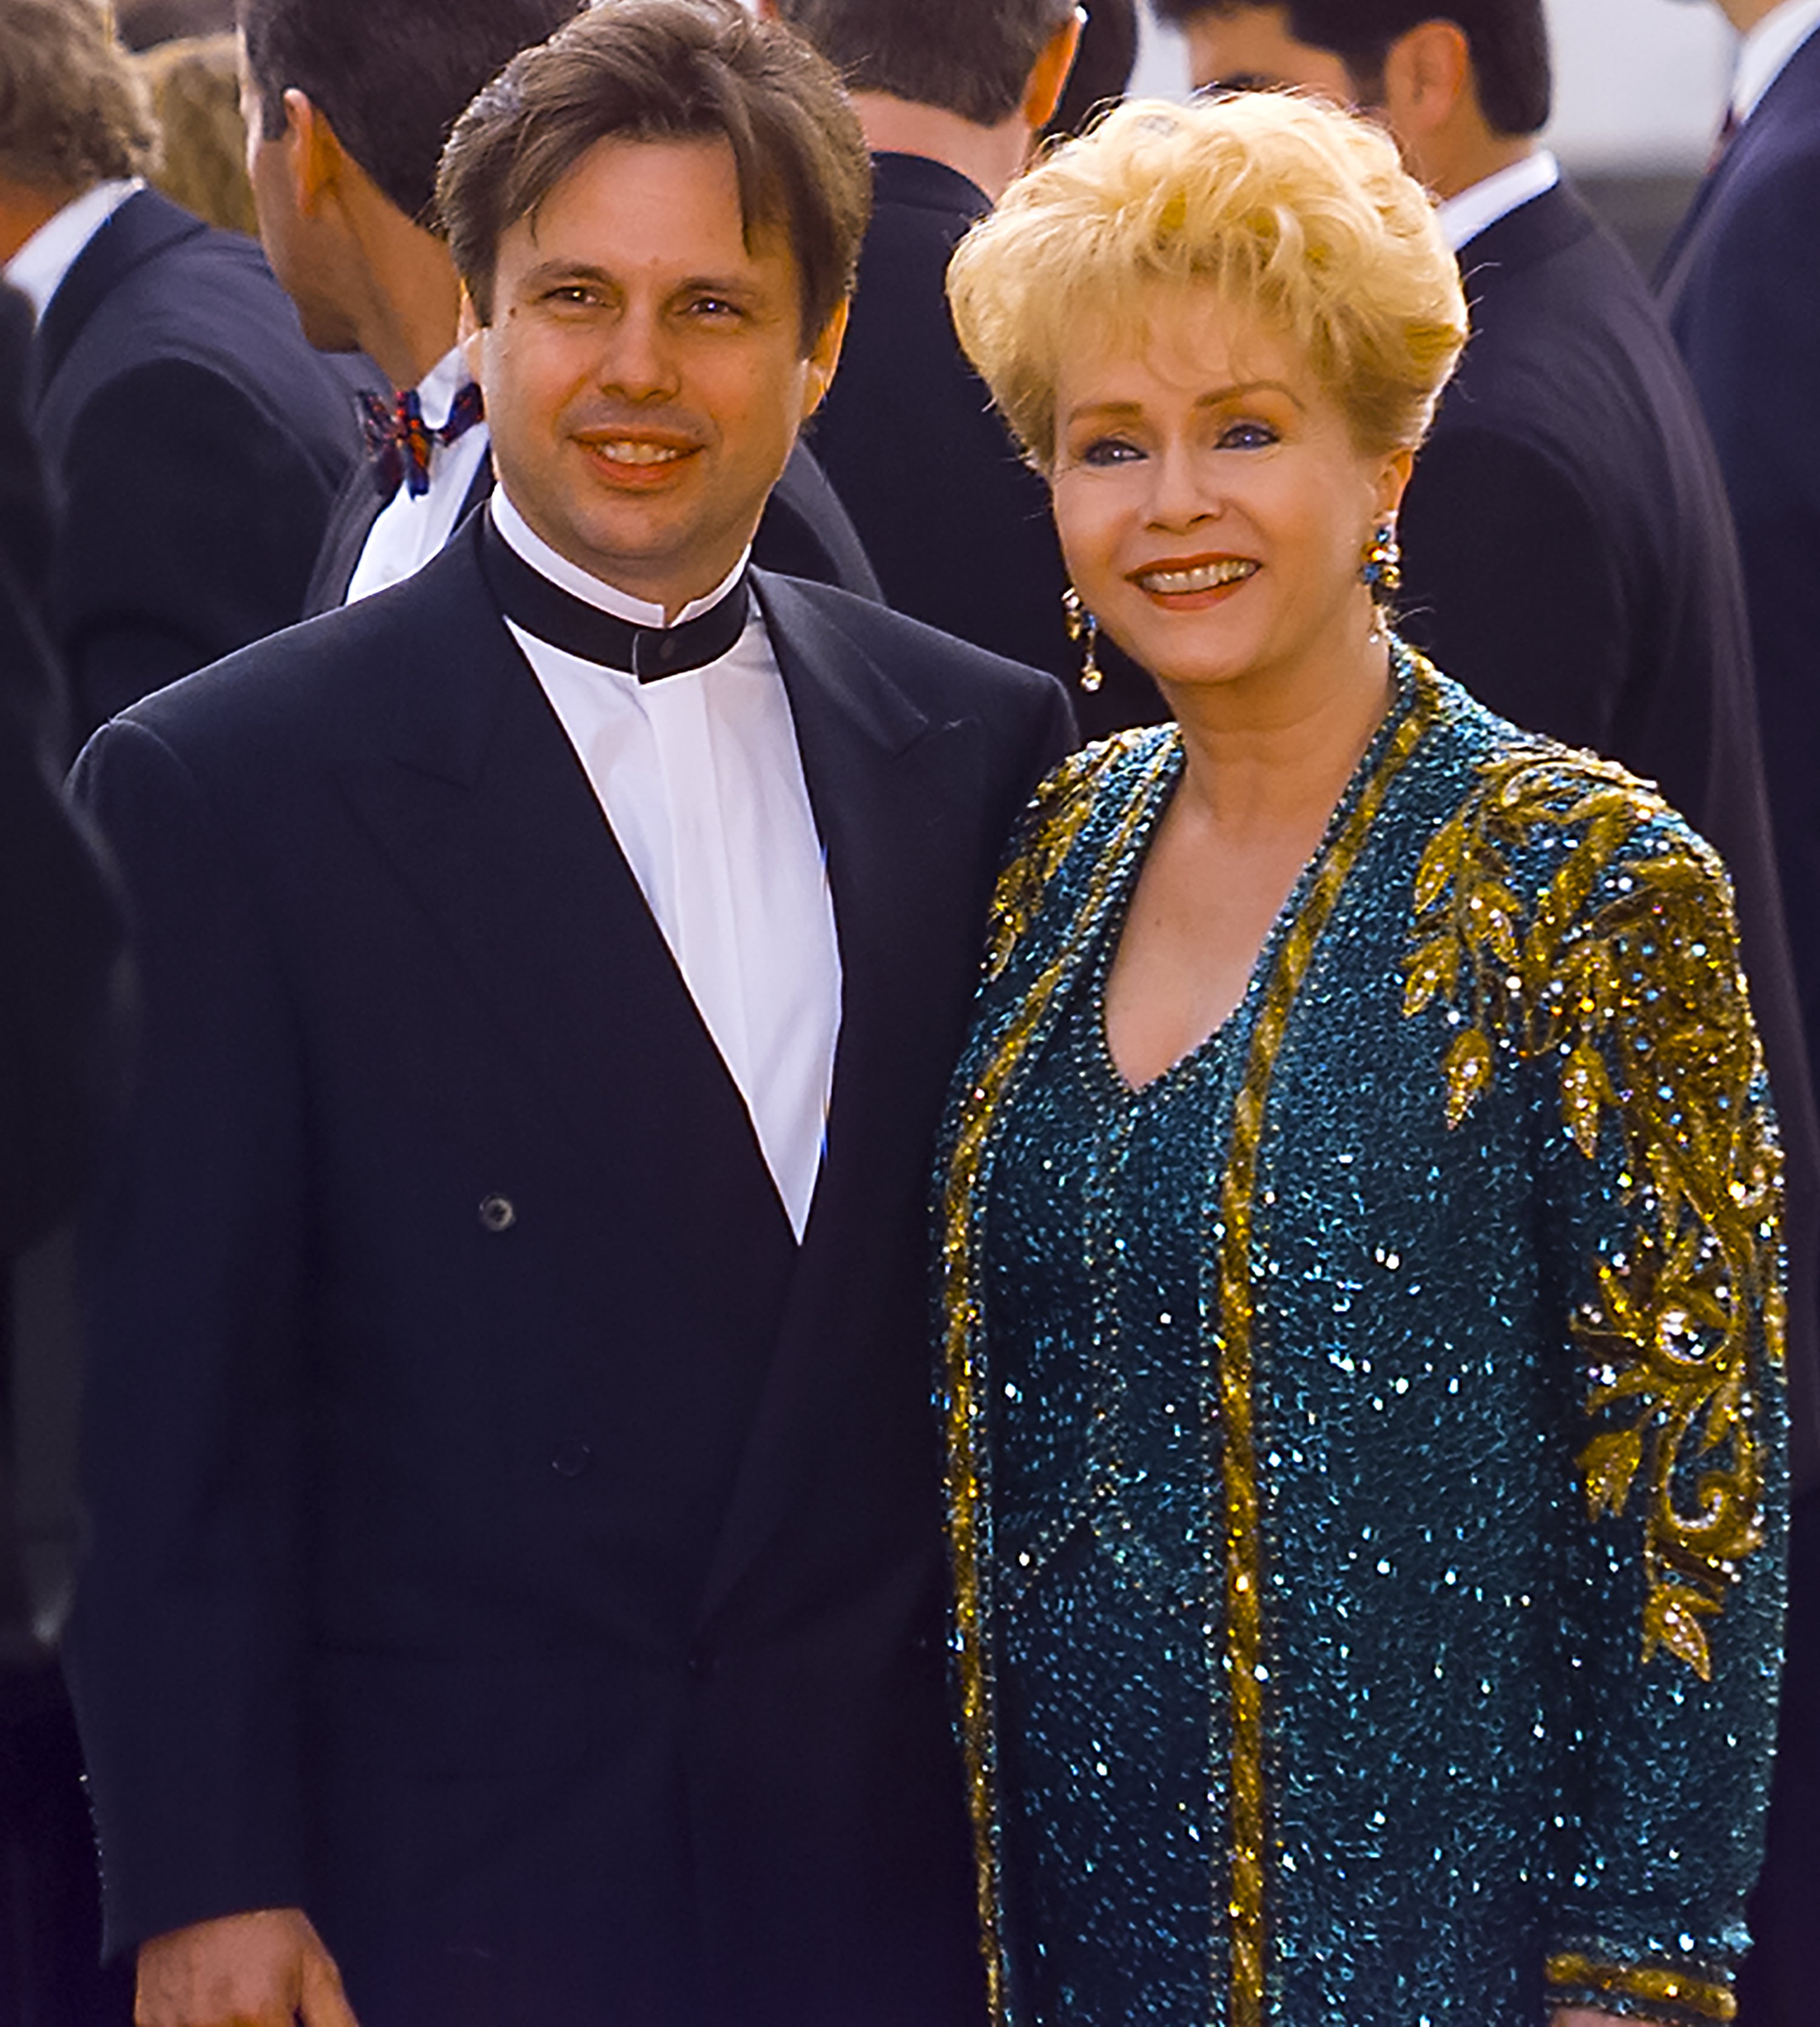 Debbie Reynolds and her son Todd Fisher arrive at the Golden Globe Awards Show on January 19, 1997 in Beverly Hills, California